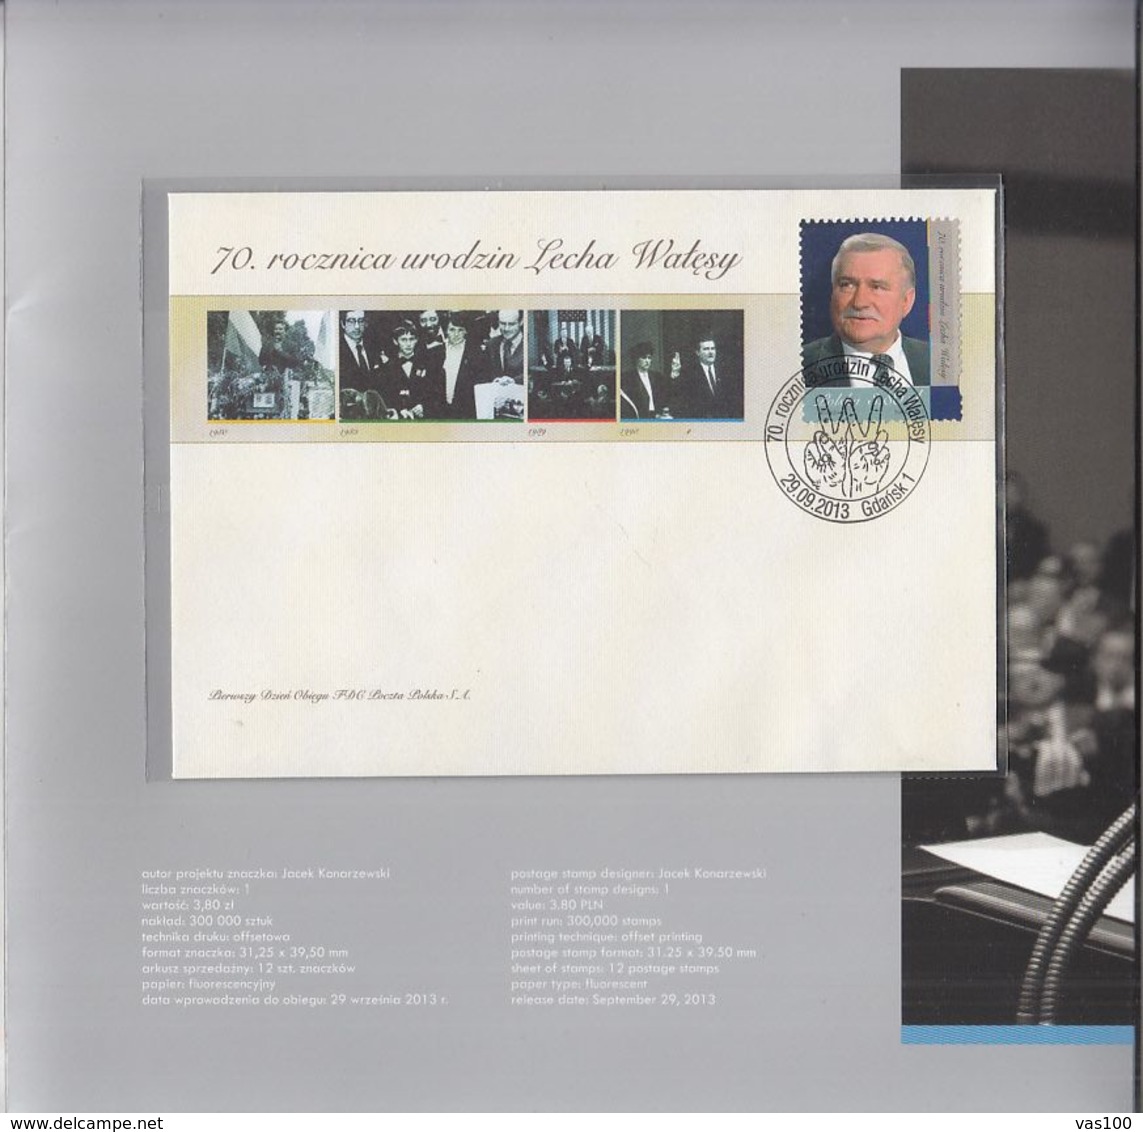 LECH WALESA ANNIVERSARY BOOKLET WITH COVER FDC AND RED BIG COVER, 2013, POLAND - Markenheftchen